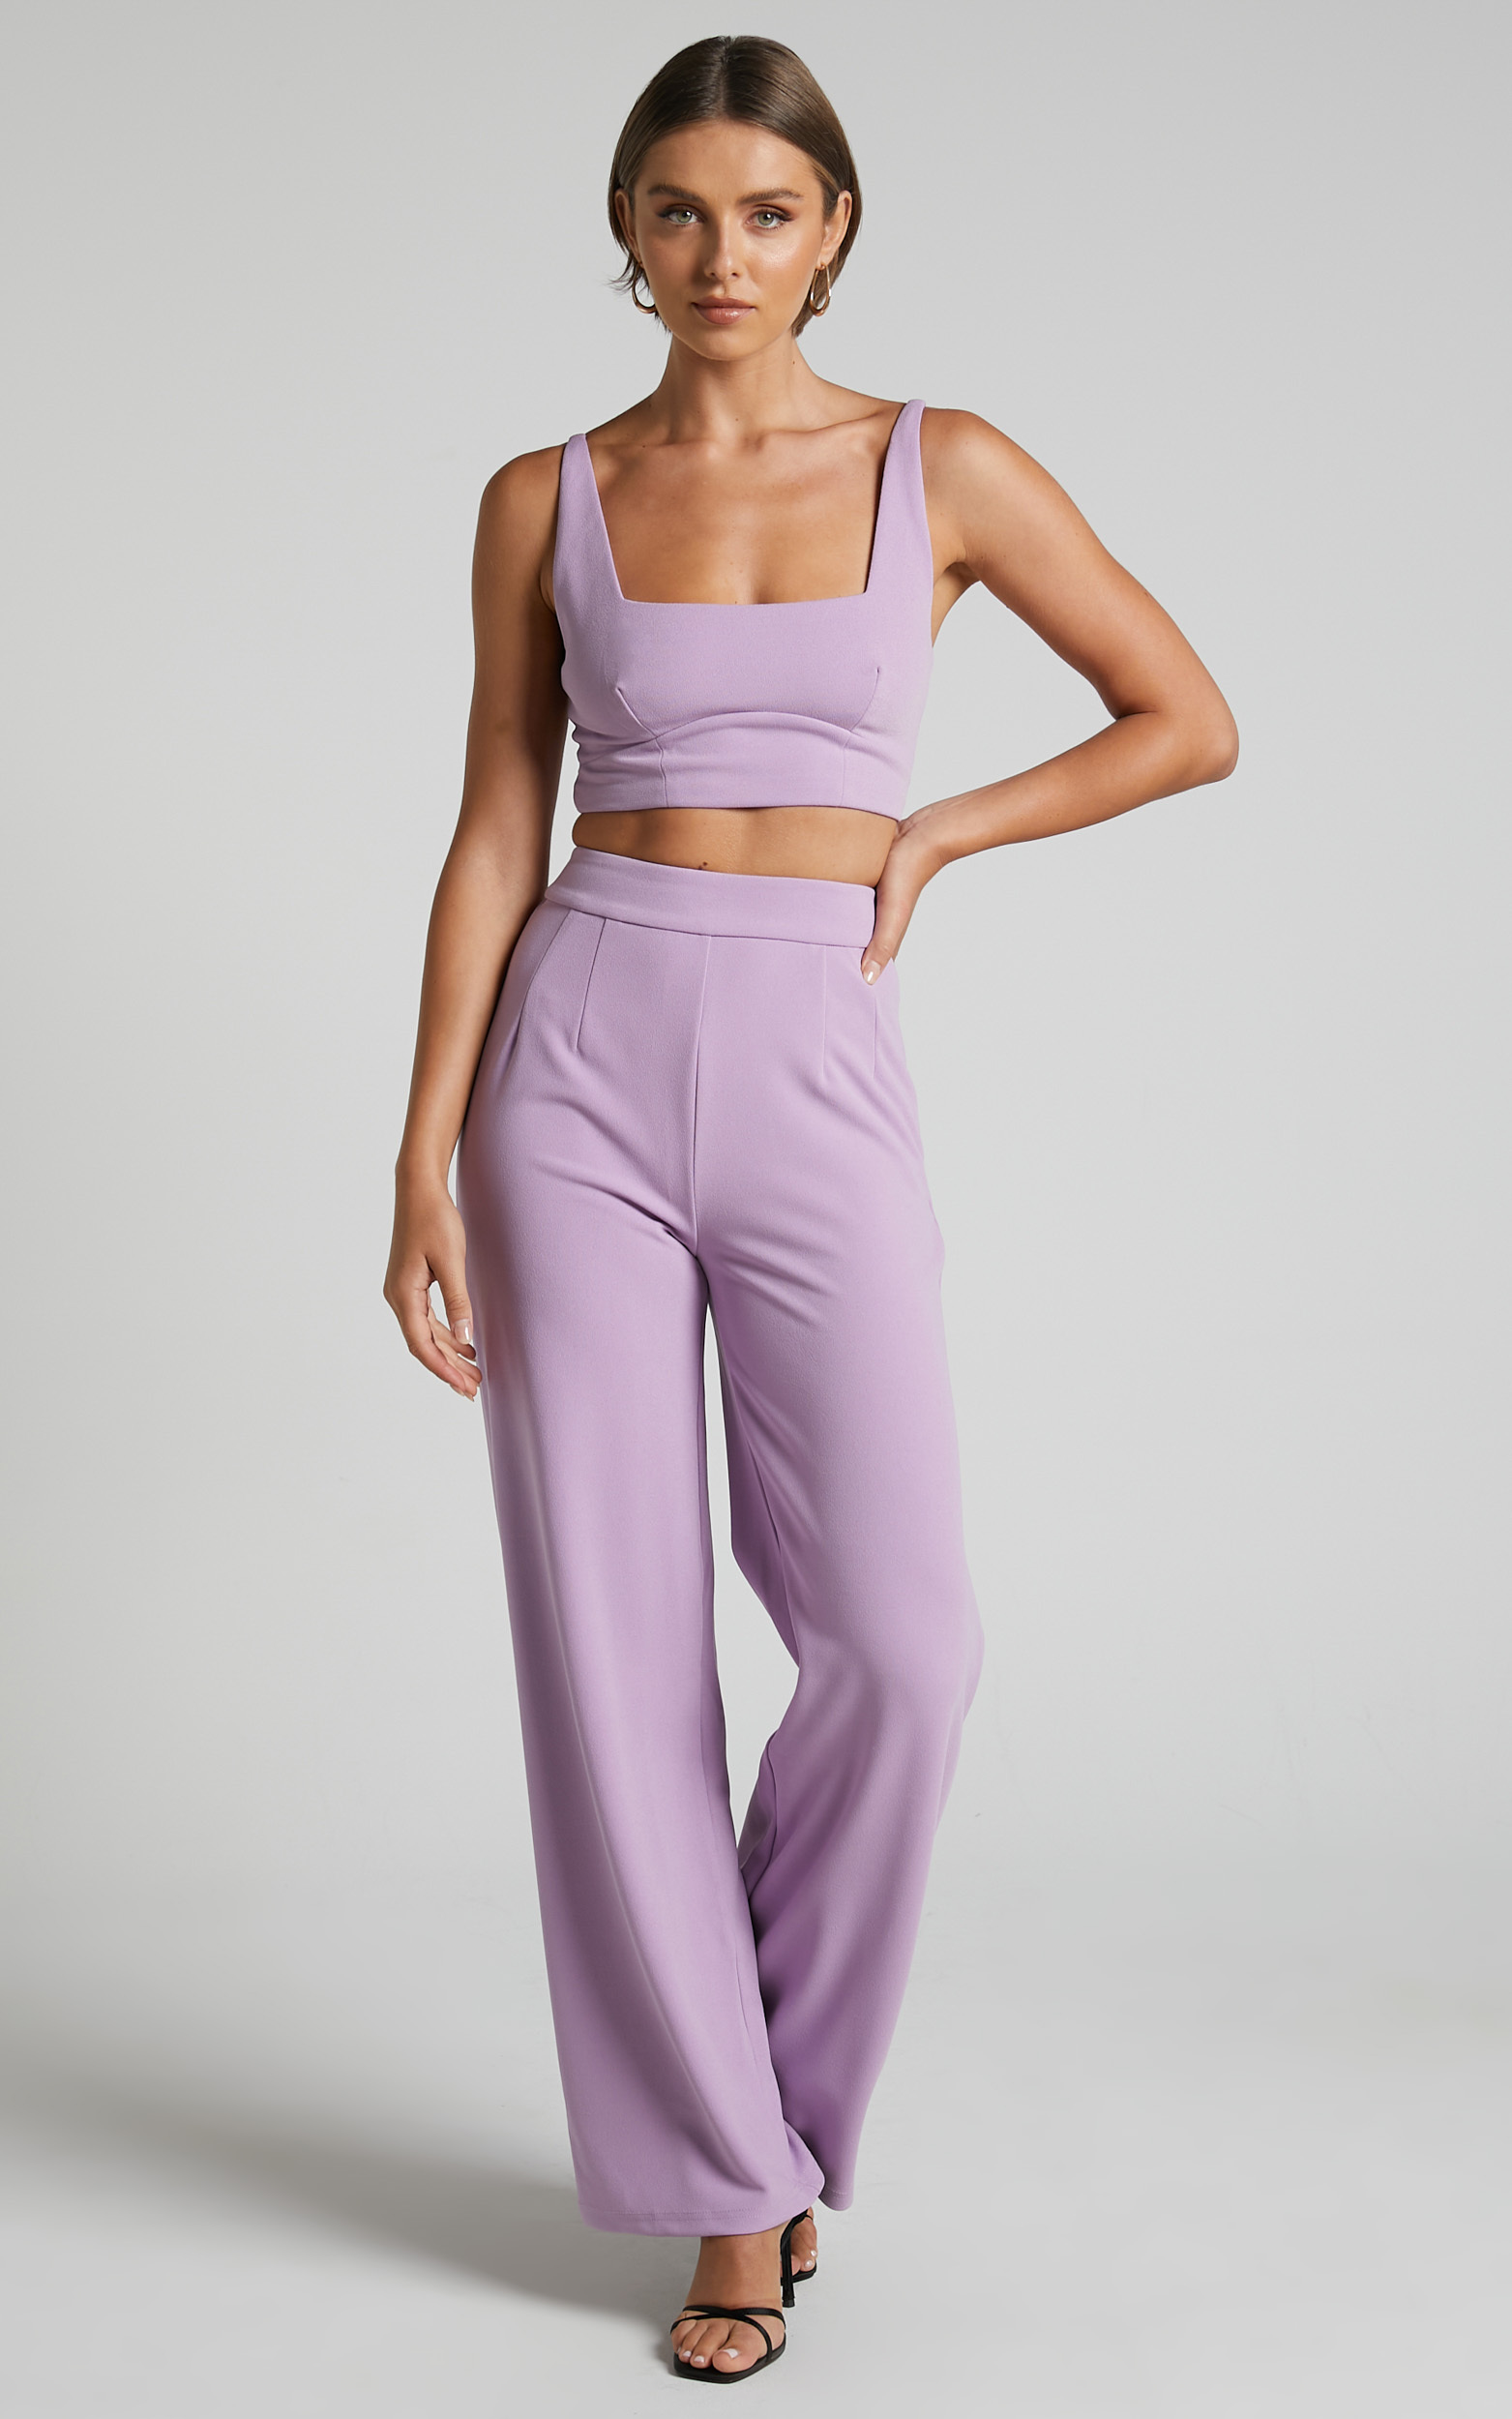 Elibeth Two Piece Set - Crop Top and High Waisted Wide Leg Pants in Lilac |  Showpo